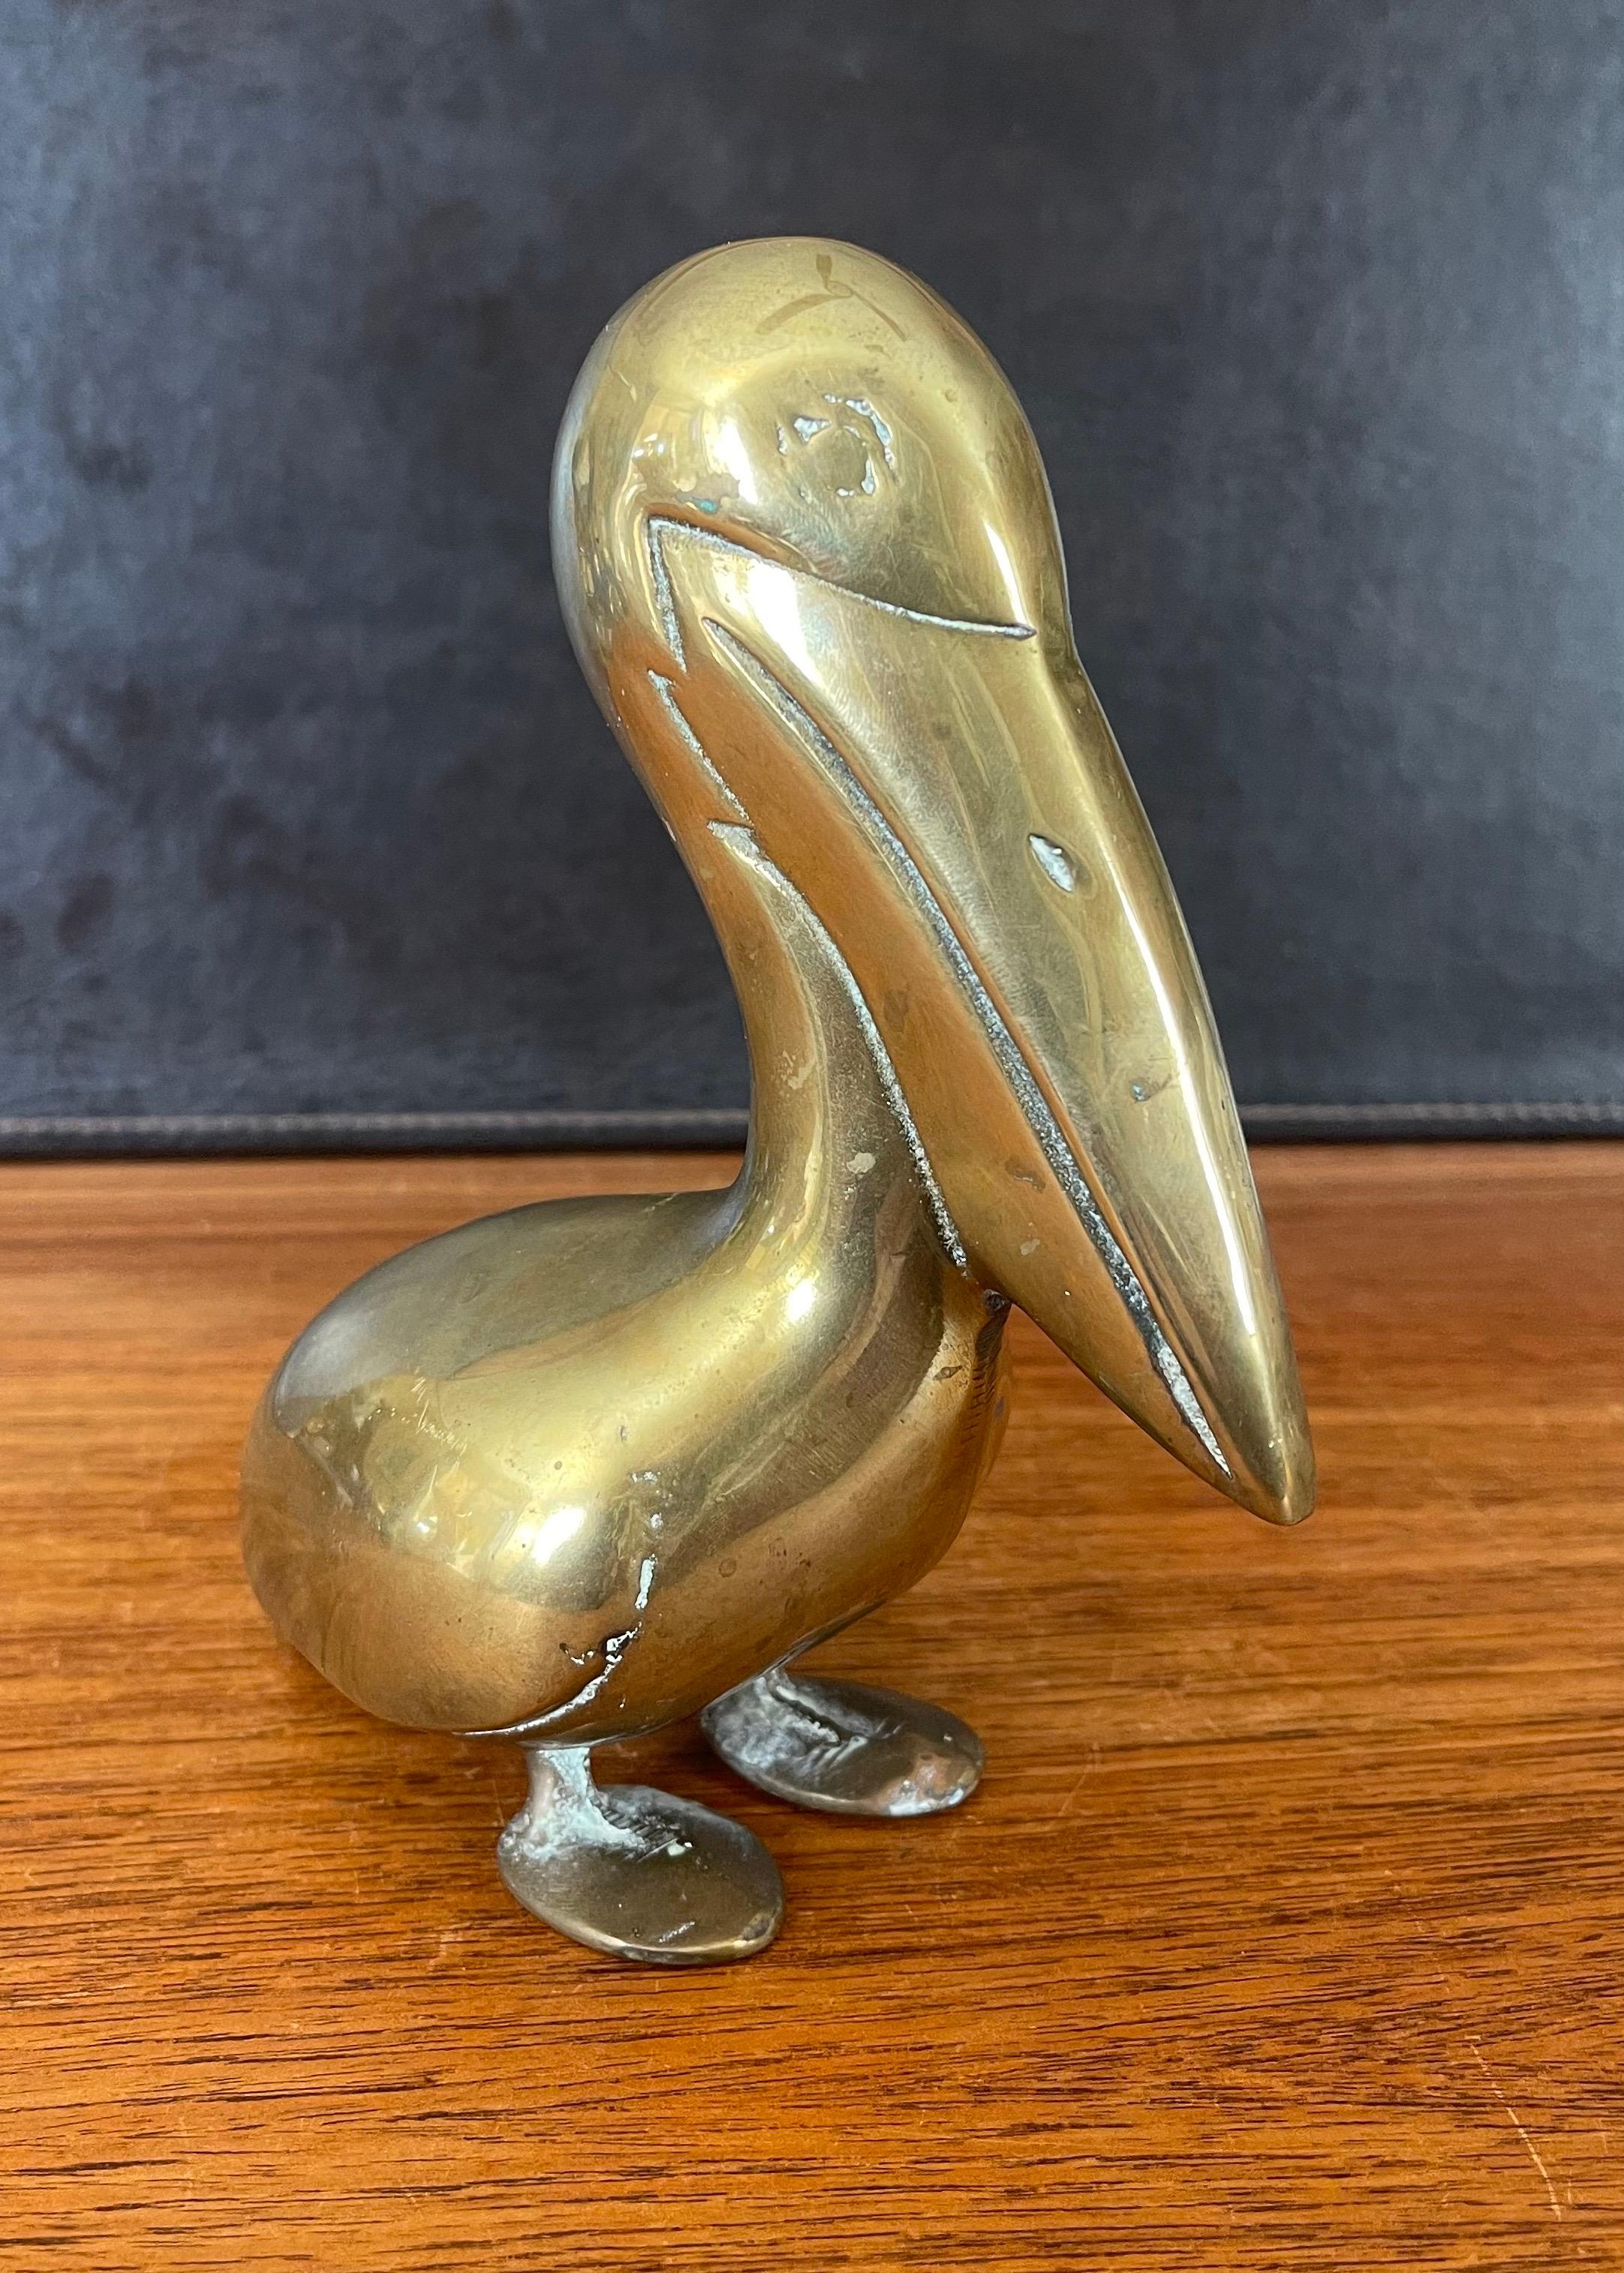 A very cool modernist brass pelican sculpture with a gorgeous natural patina, circa 1970s. The piece is in very good vintage condition and measures 4